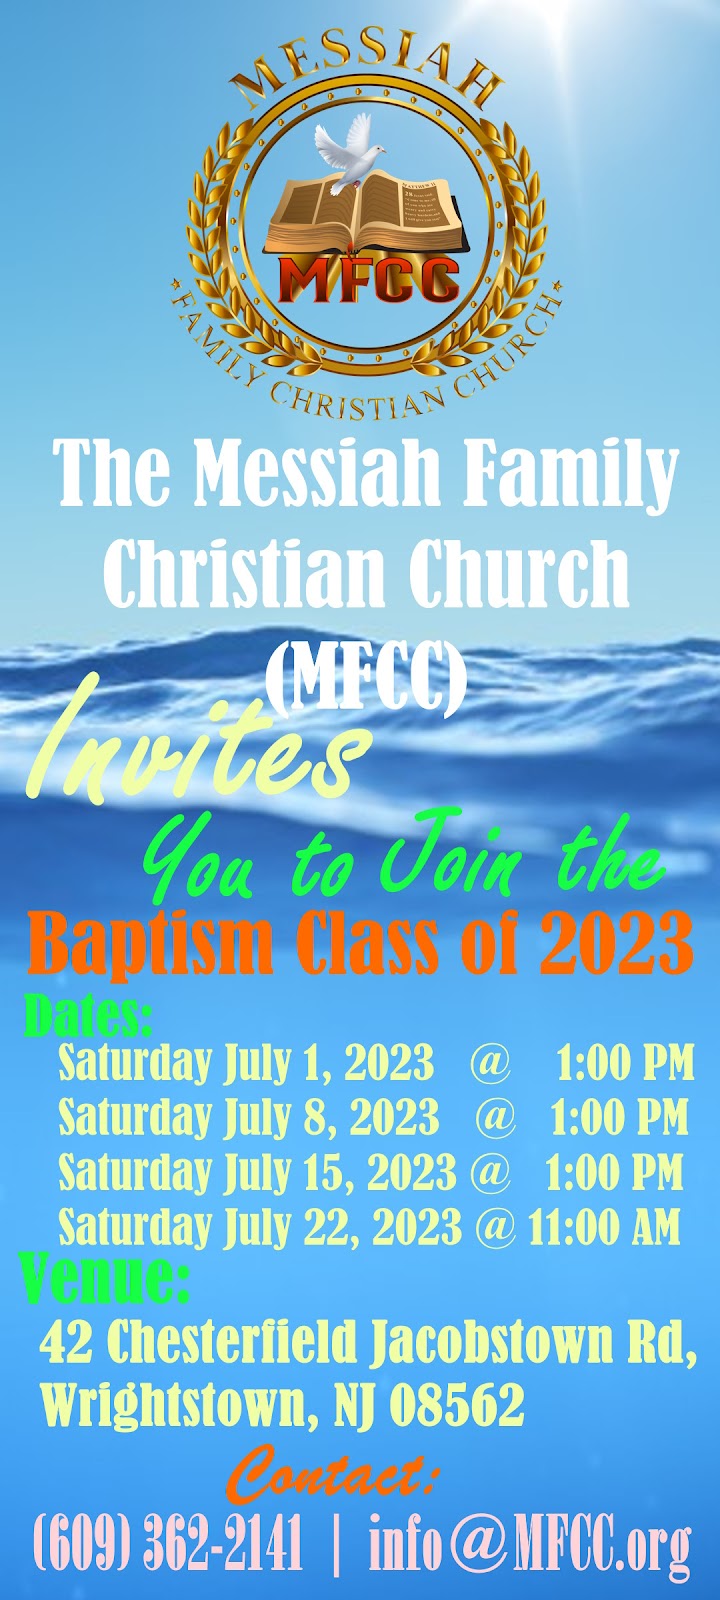 Messiah Family Christian Church | 42 Chesterfield Jacobstown Rd, Wrightstown, NJ 08562 | Phone: (609) 362-2141